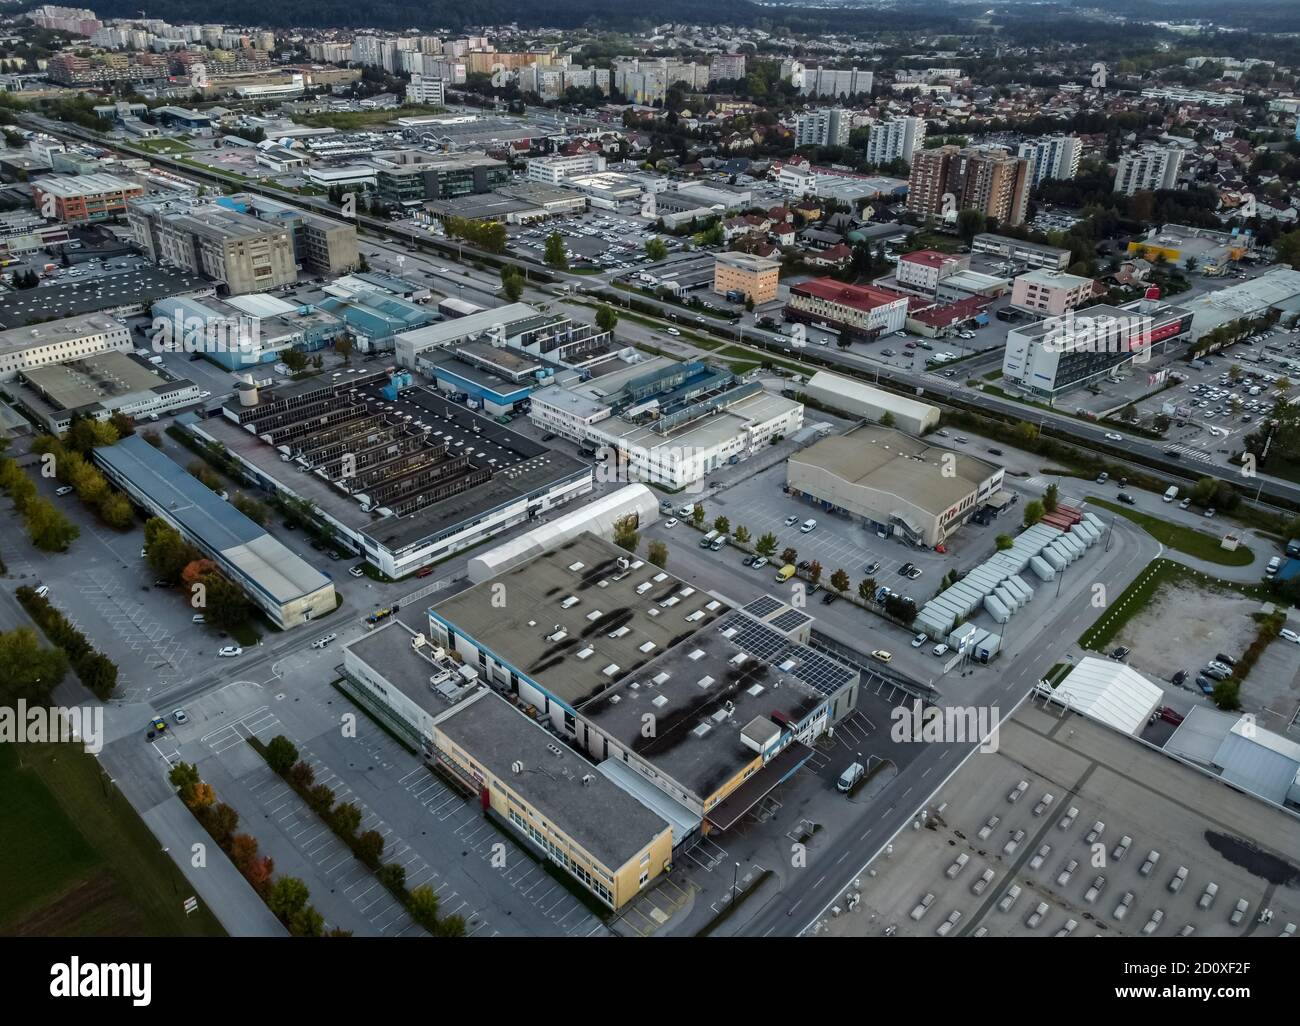 Evening industrial zone district drone aerial view Stock Photo